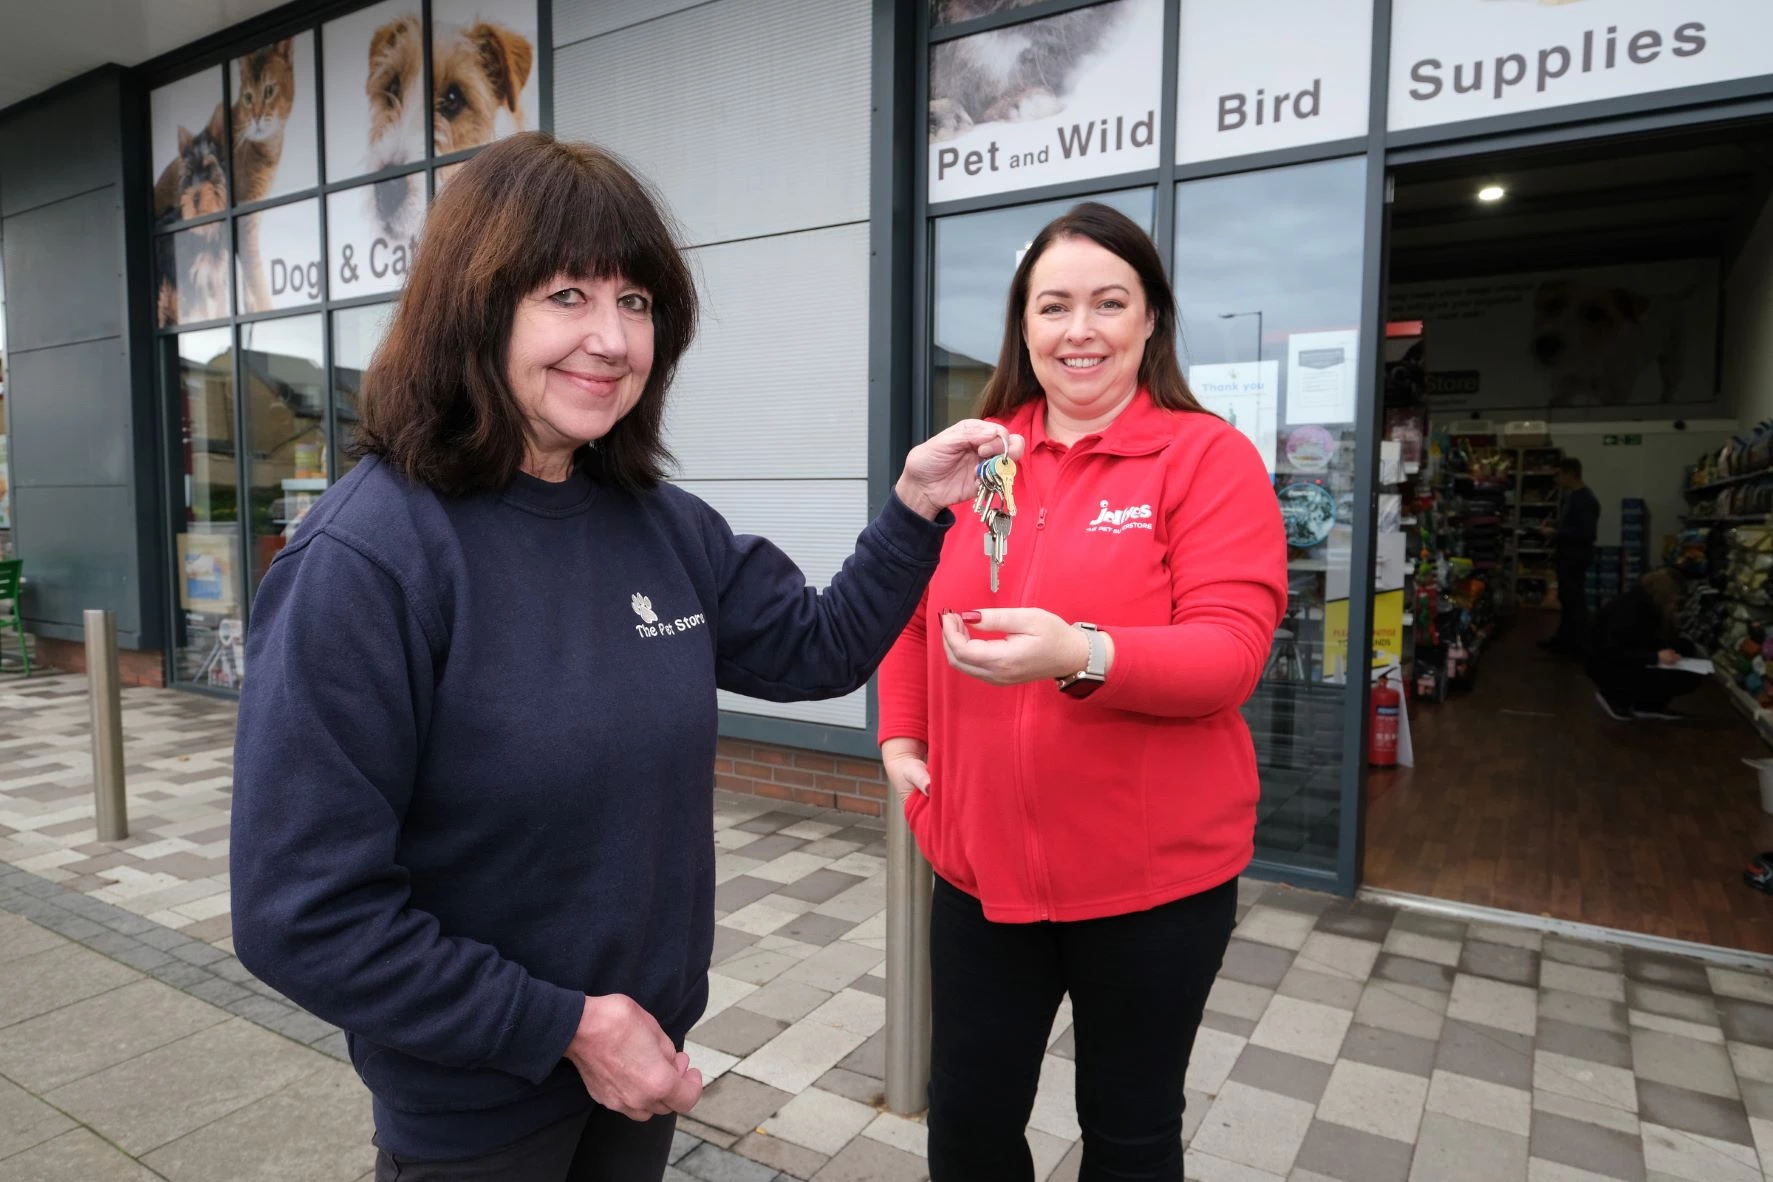 (L - R): Liz Bowers from The Pet Store with Jollyes area manager Sarah Farrar.